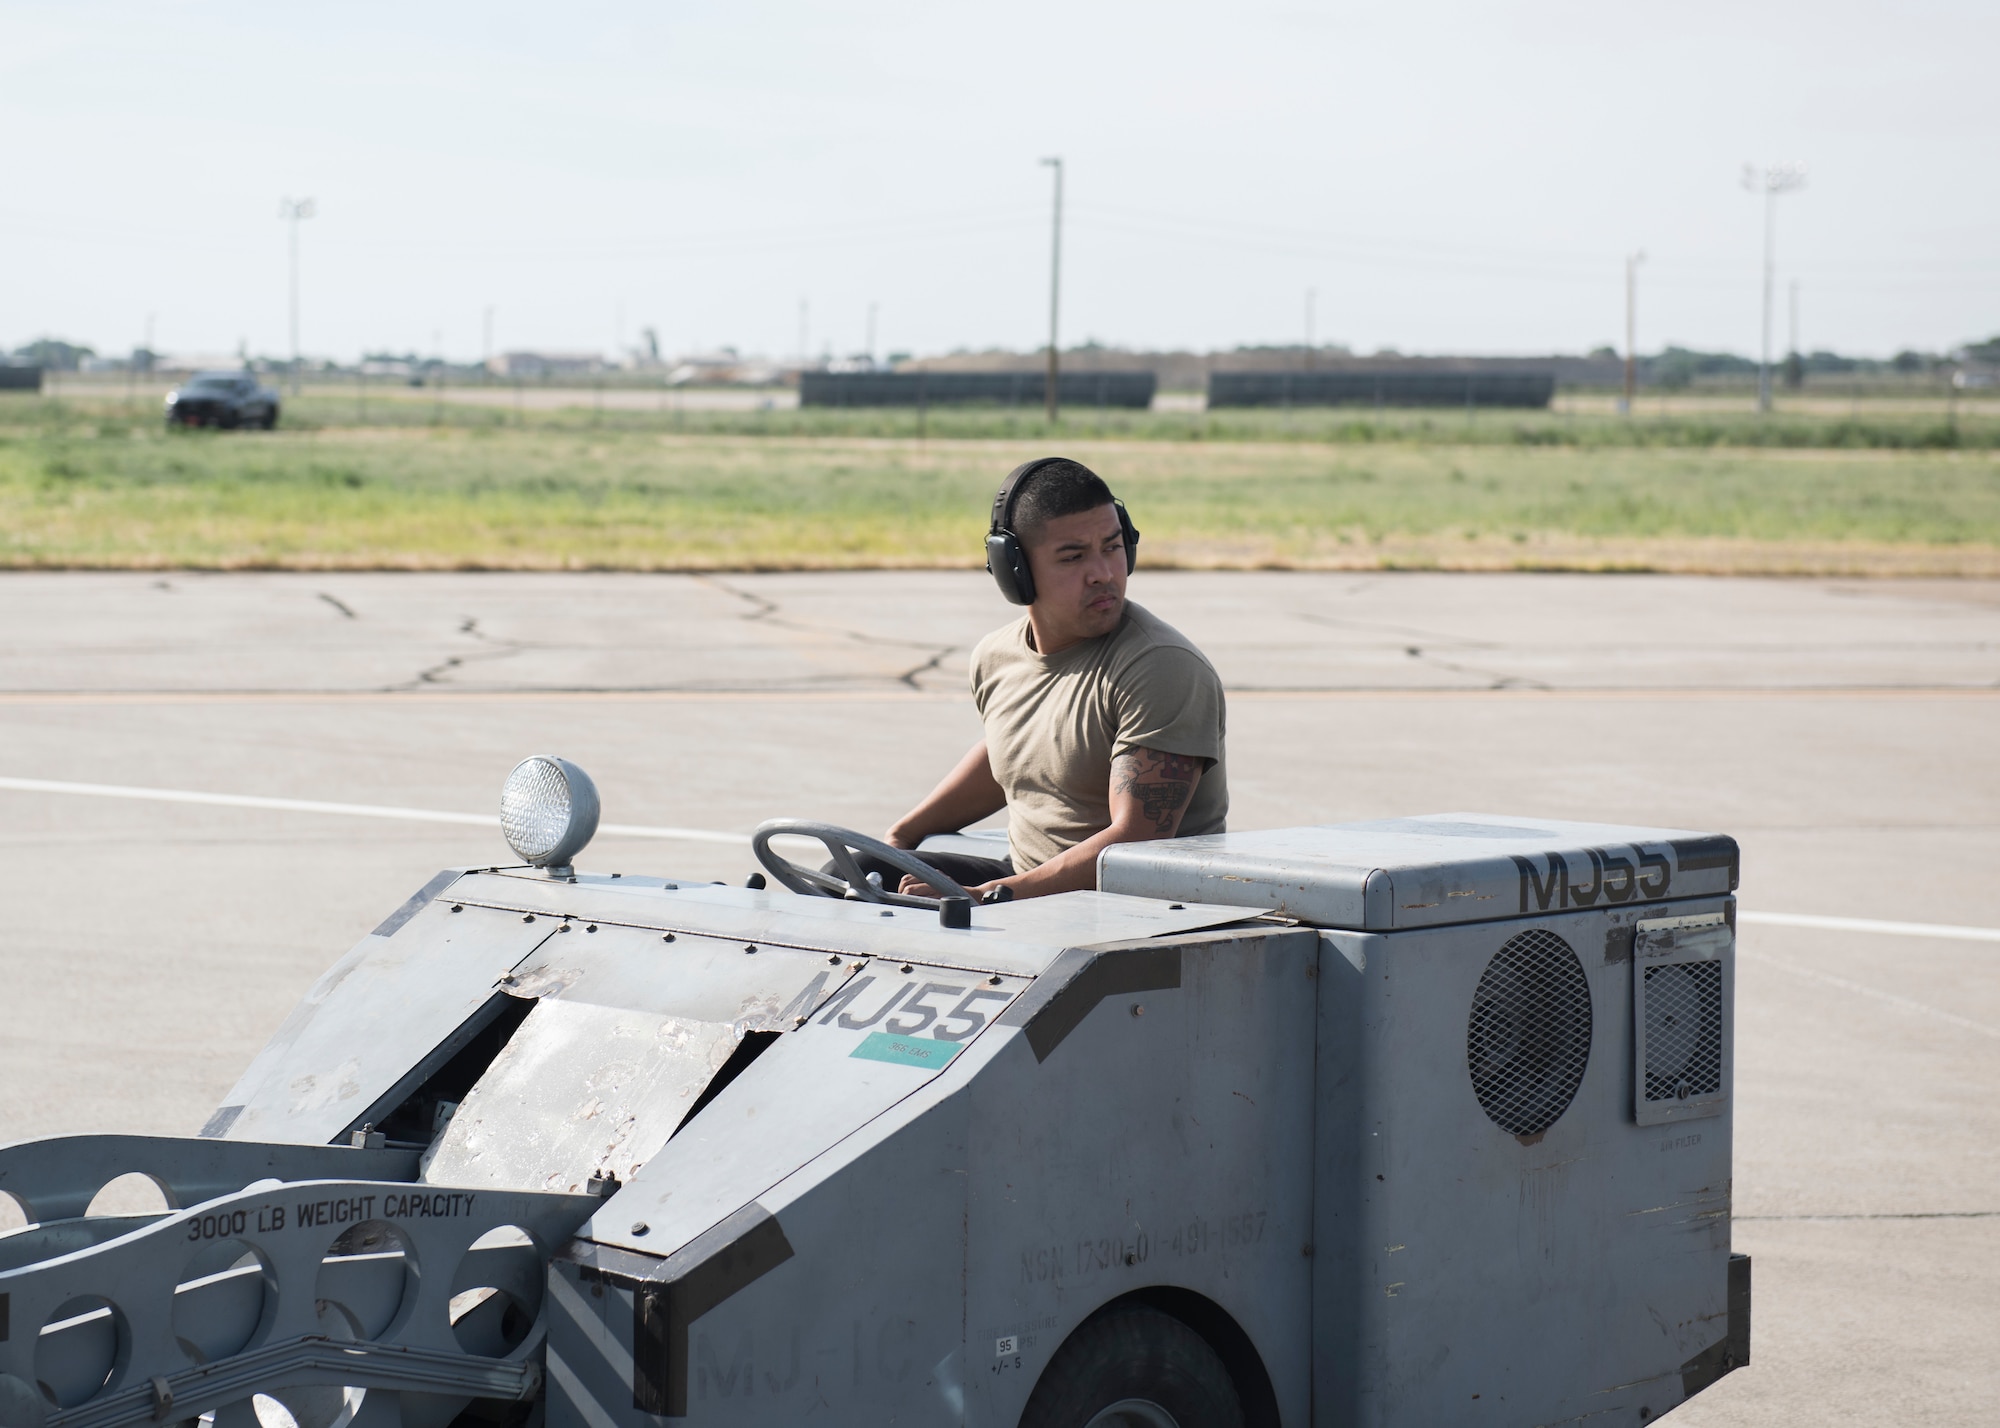 Senior Airmen Jonathan Castelan Medina moves training equipment to an F-15E Strike Eagle during the Adaptive Basing exercise July 17, 2019, at Mountain Home Air Force Base. This training was done in order for the fighter squadrons to sharpen their Adaptive Basing strategies, enhancing it's potential down range. (U.S. Air Force photo by Senior Airman Tyrell Hall)